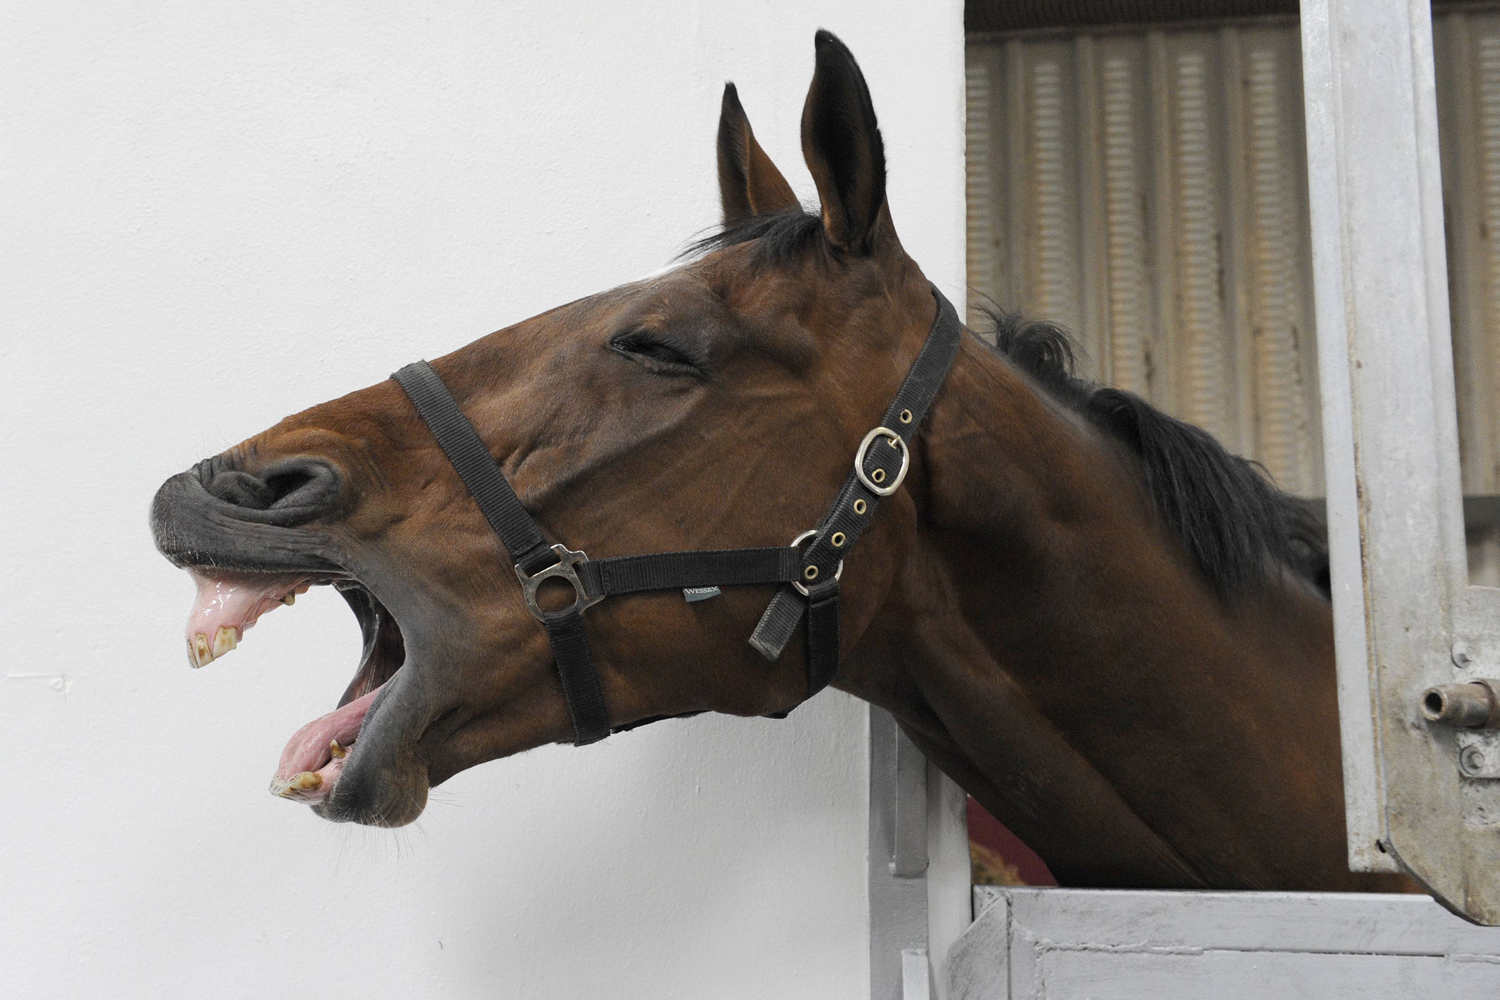 Former Grand National favourite Teaforthree is seen during a visit by Britain's Queen Elizabeth to Cotts Equine Hospital in Narberth, Wales on April 29, 2014.